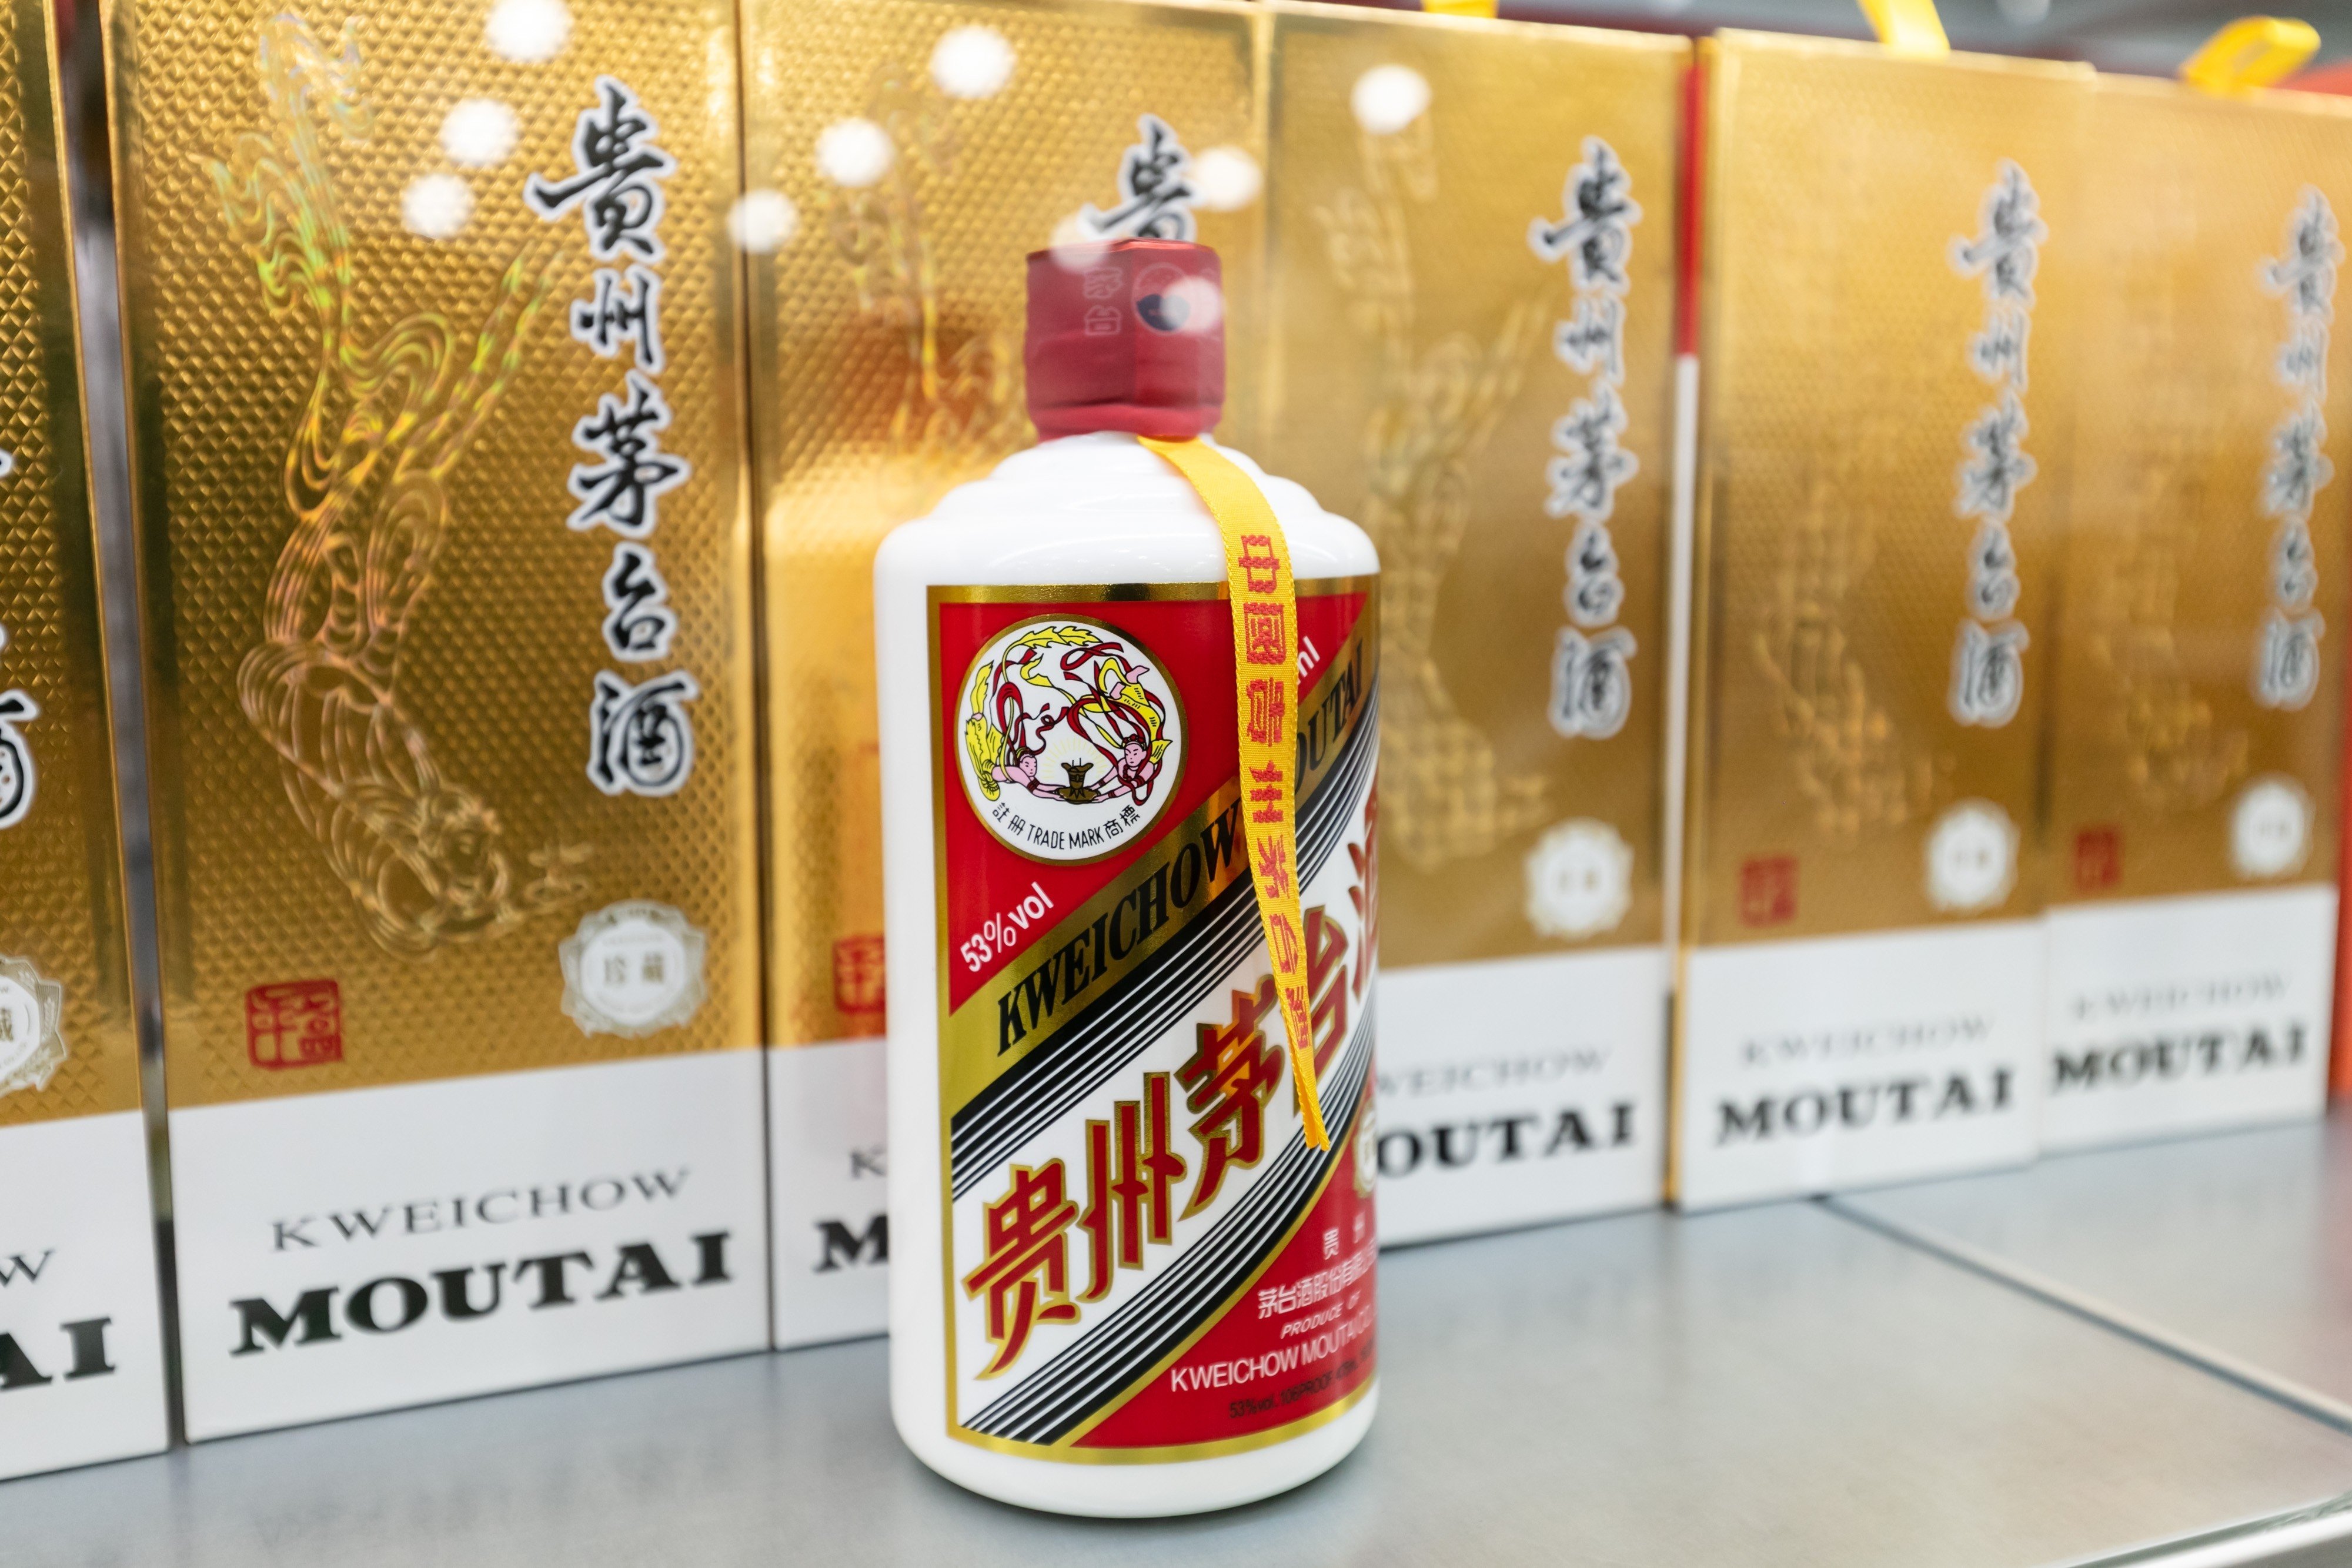 Prices of Kweichow Moutai has trended lower in the past two months. Photo: Shutterstock